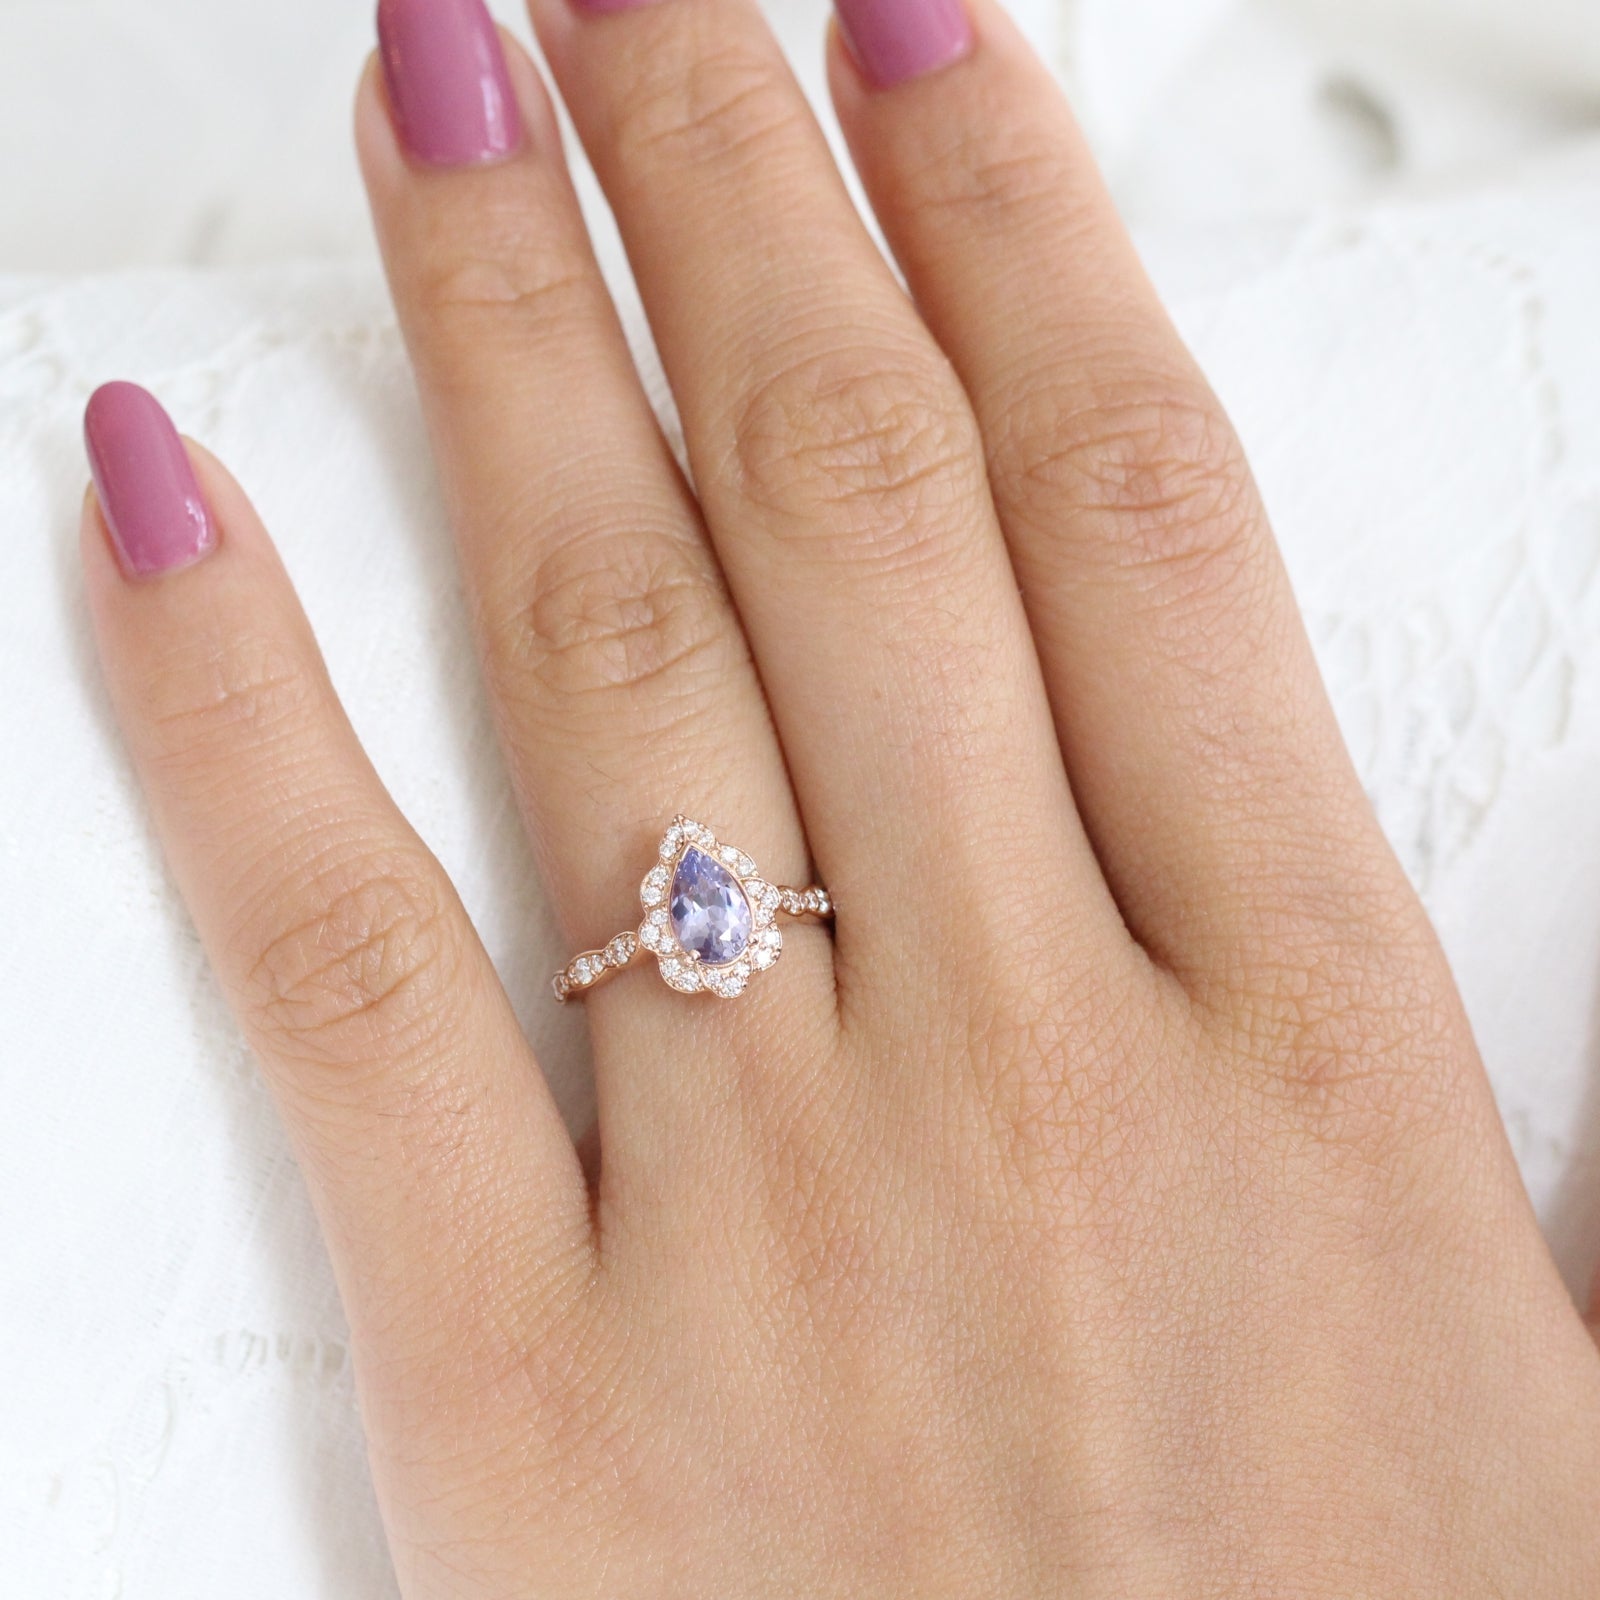 Purple Sapphire Engagement Ring in Rose Gold Vintage Floral Pear Diamond Ring by La More Design Jewelry